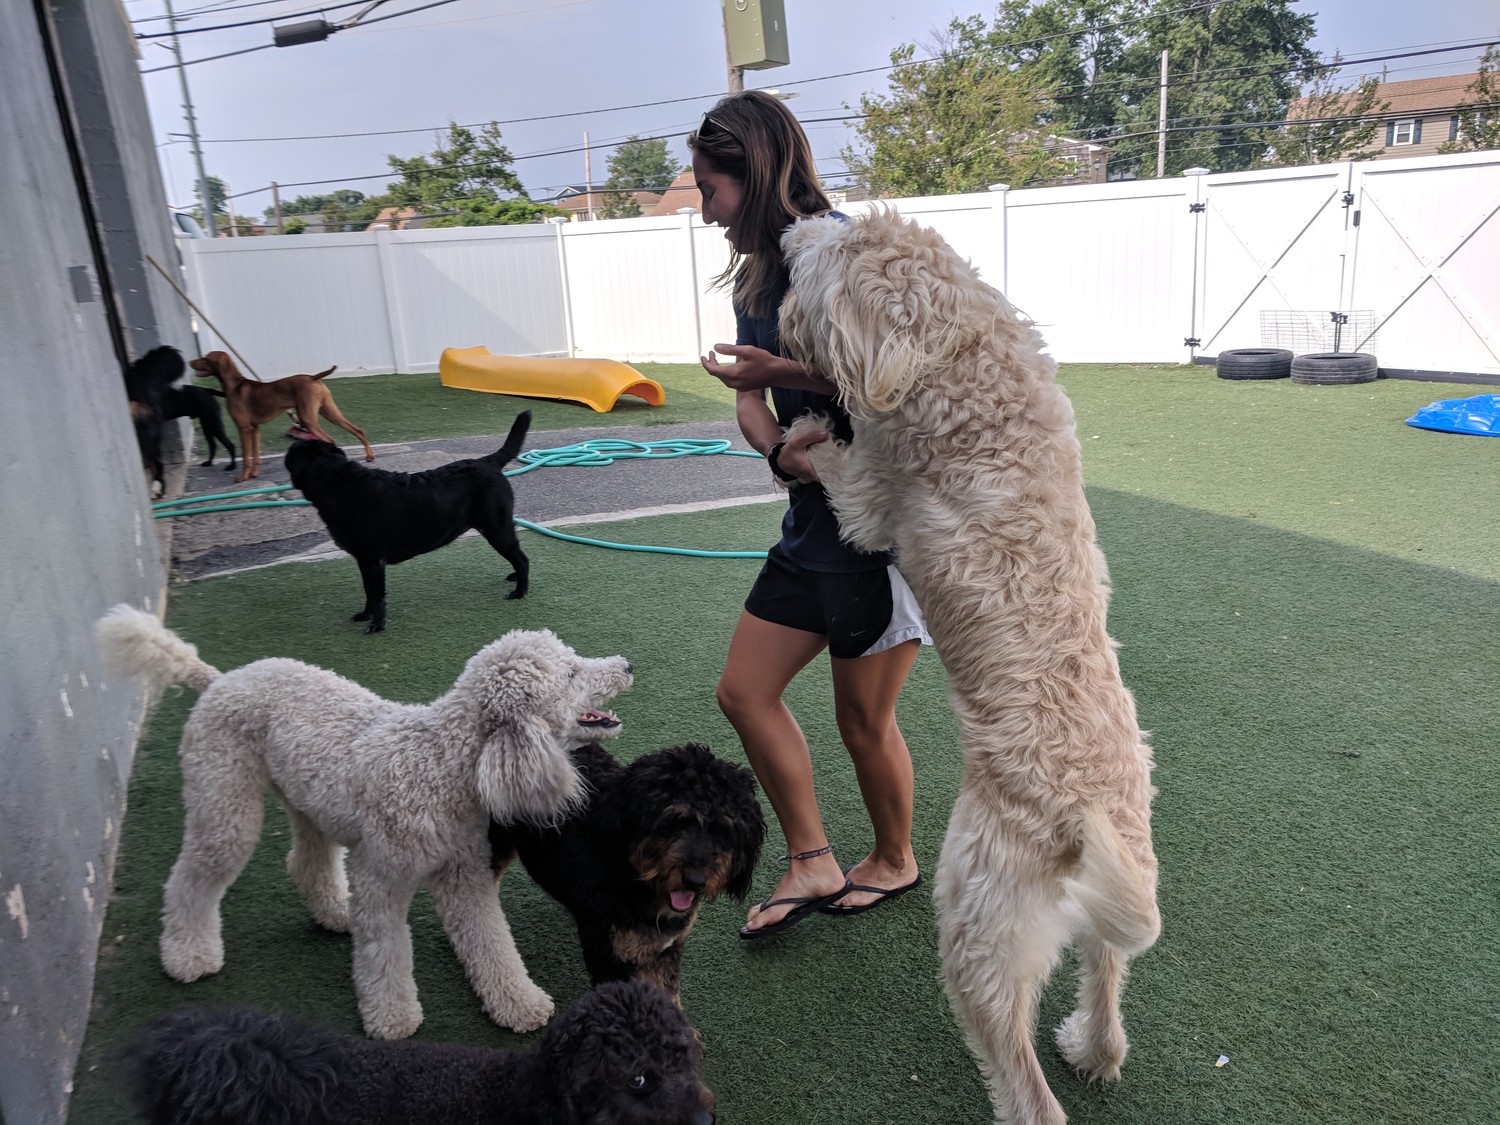 At Hounds Town USA in Island Park, the dogs being cared for are not kept in kennels and are allowed to roam free in the backyard, playing with each other. “No collar, no rules,” said employee Courtney Sills.